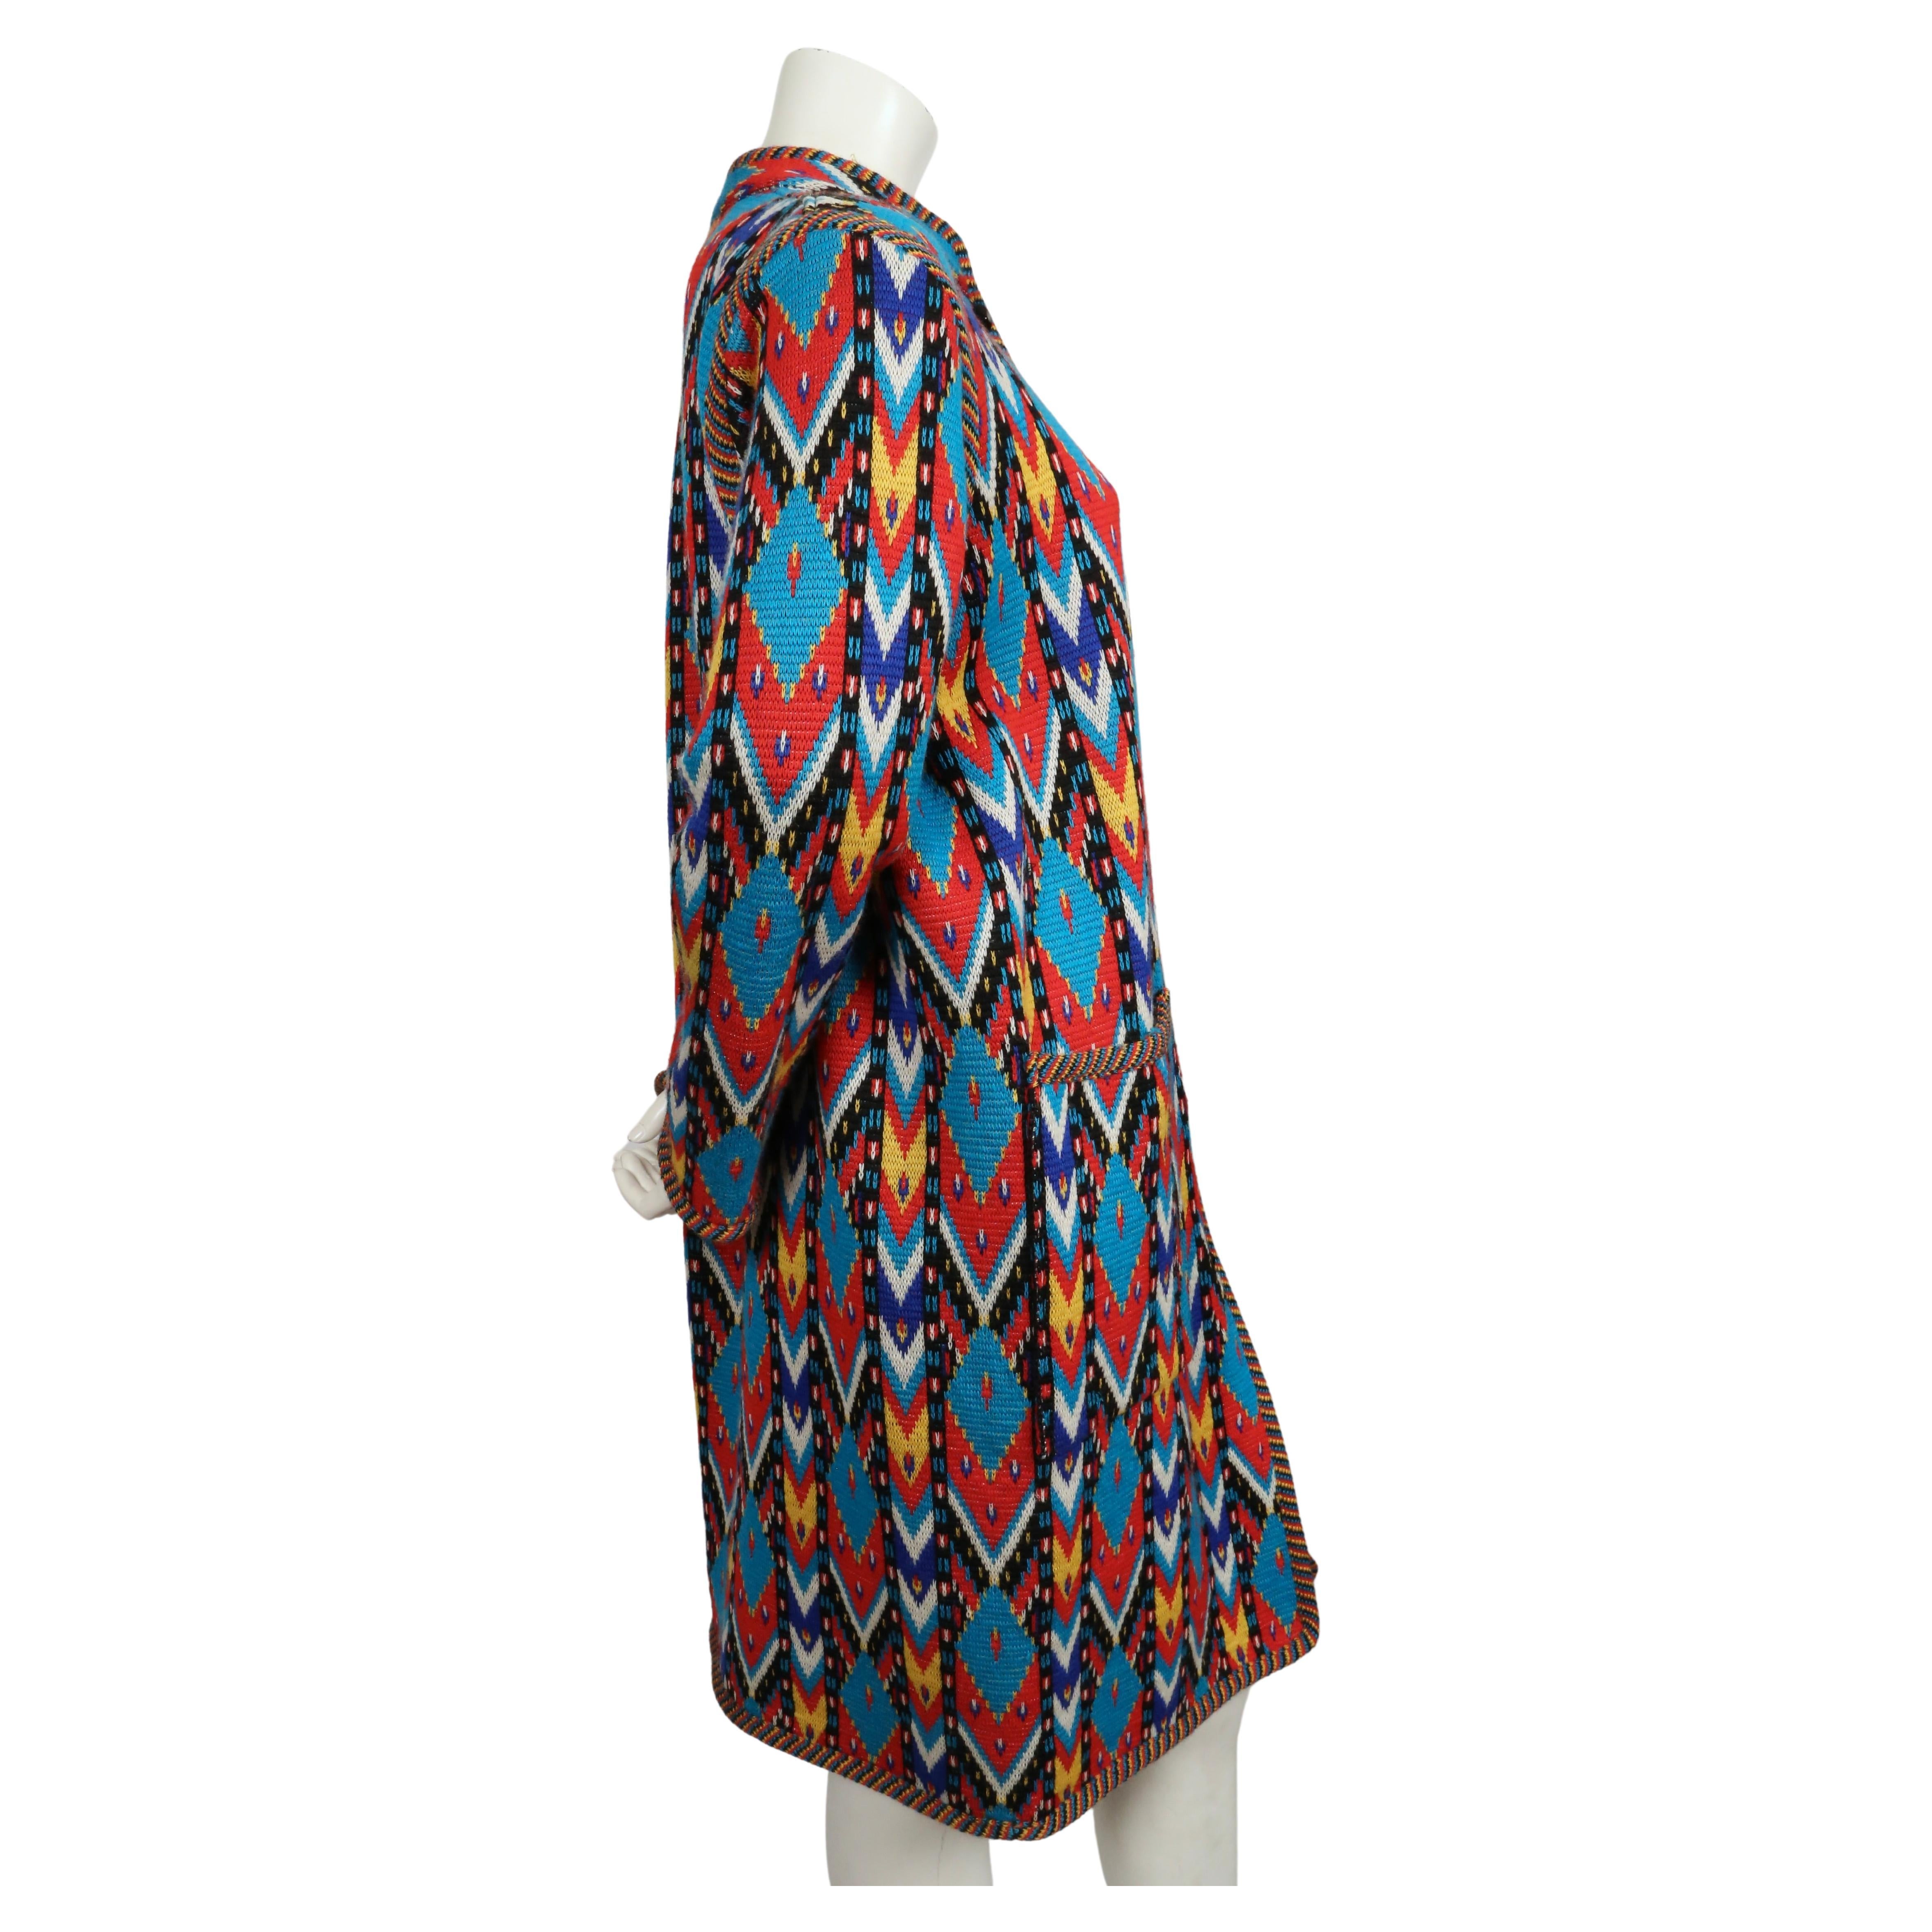 1979 YVES SAINT LAURENT bright Ikat sweater coat In Good Condition For Sale In San Fransisco, CA